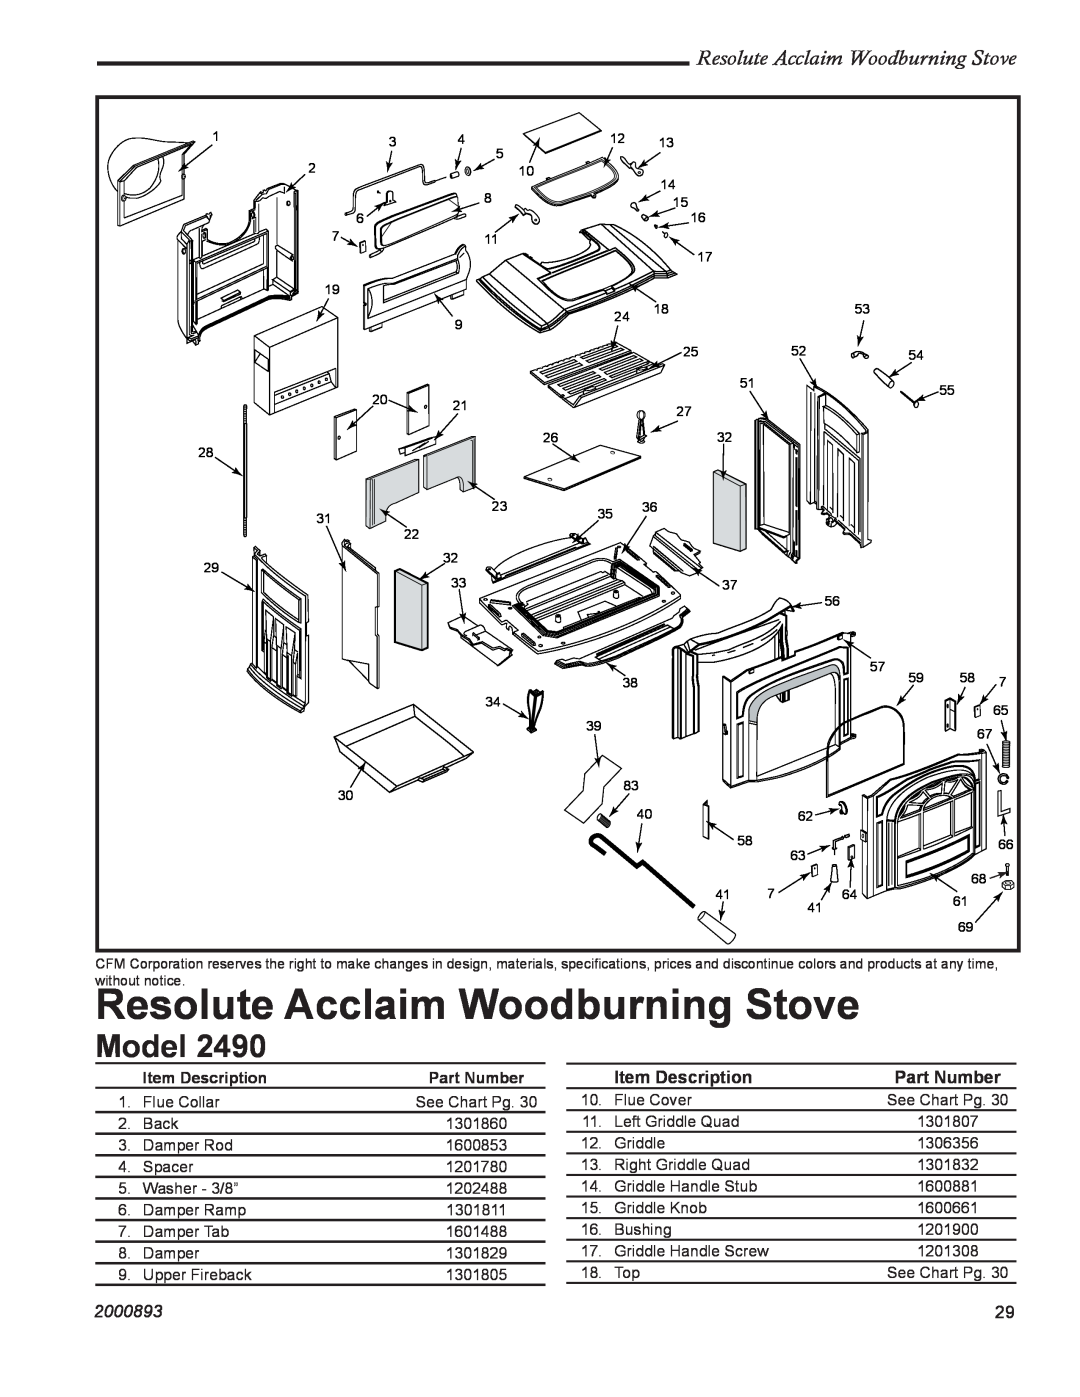 Vermont Casting 2490 Resolute Acclaim Woodburning Stove, Model, 2000893, Item Description, Part Number 